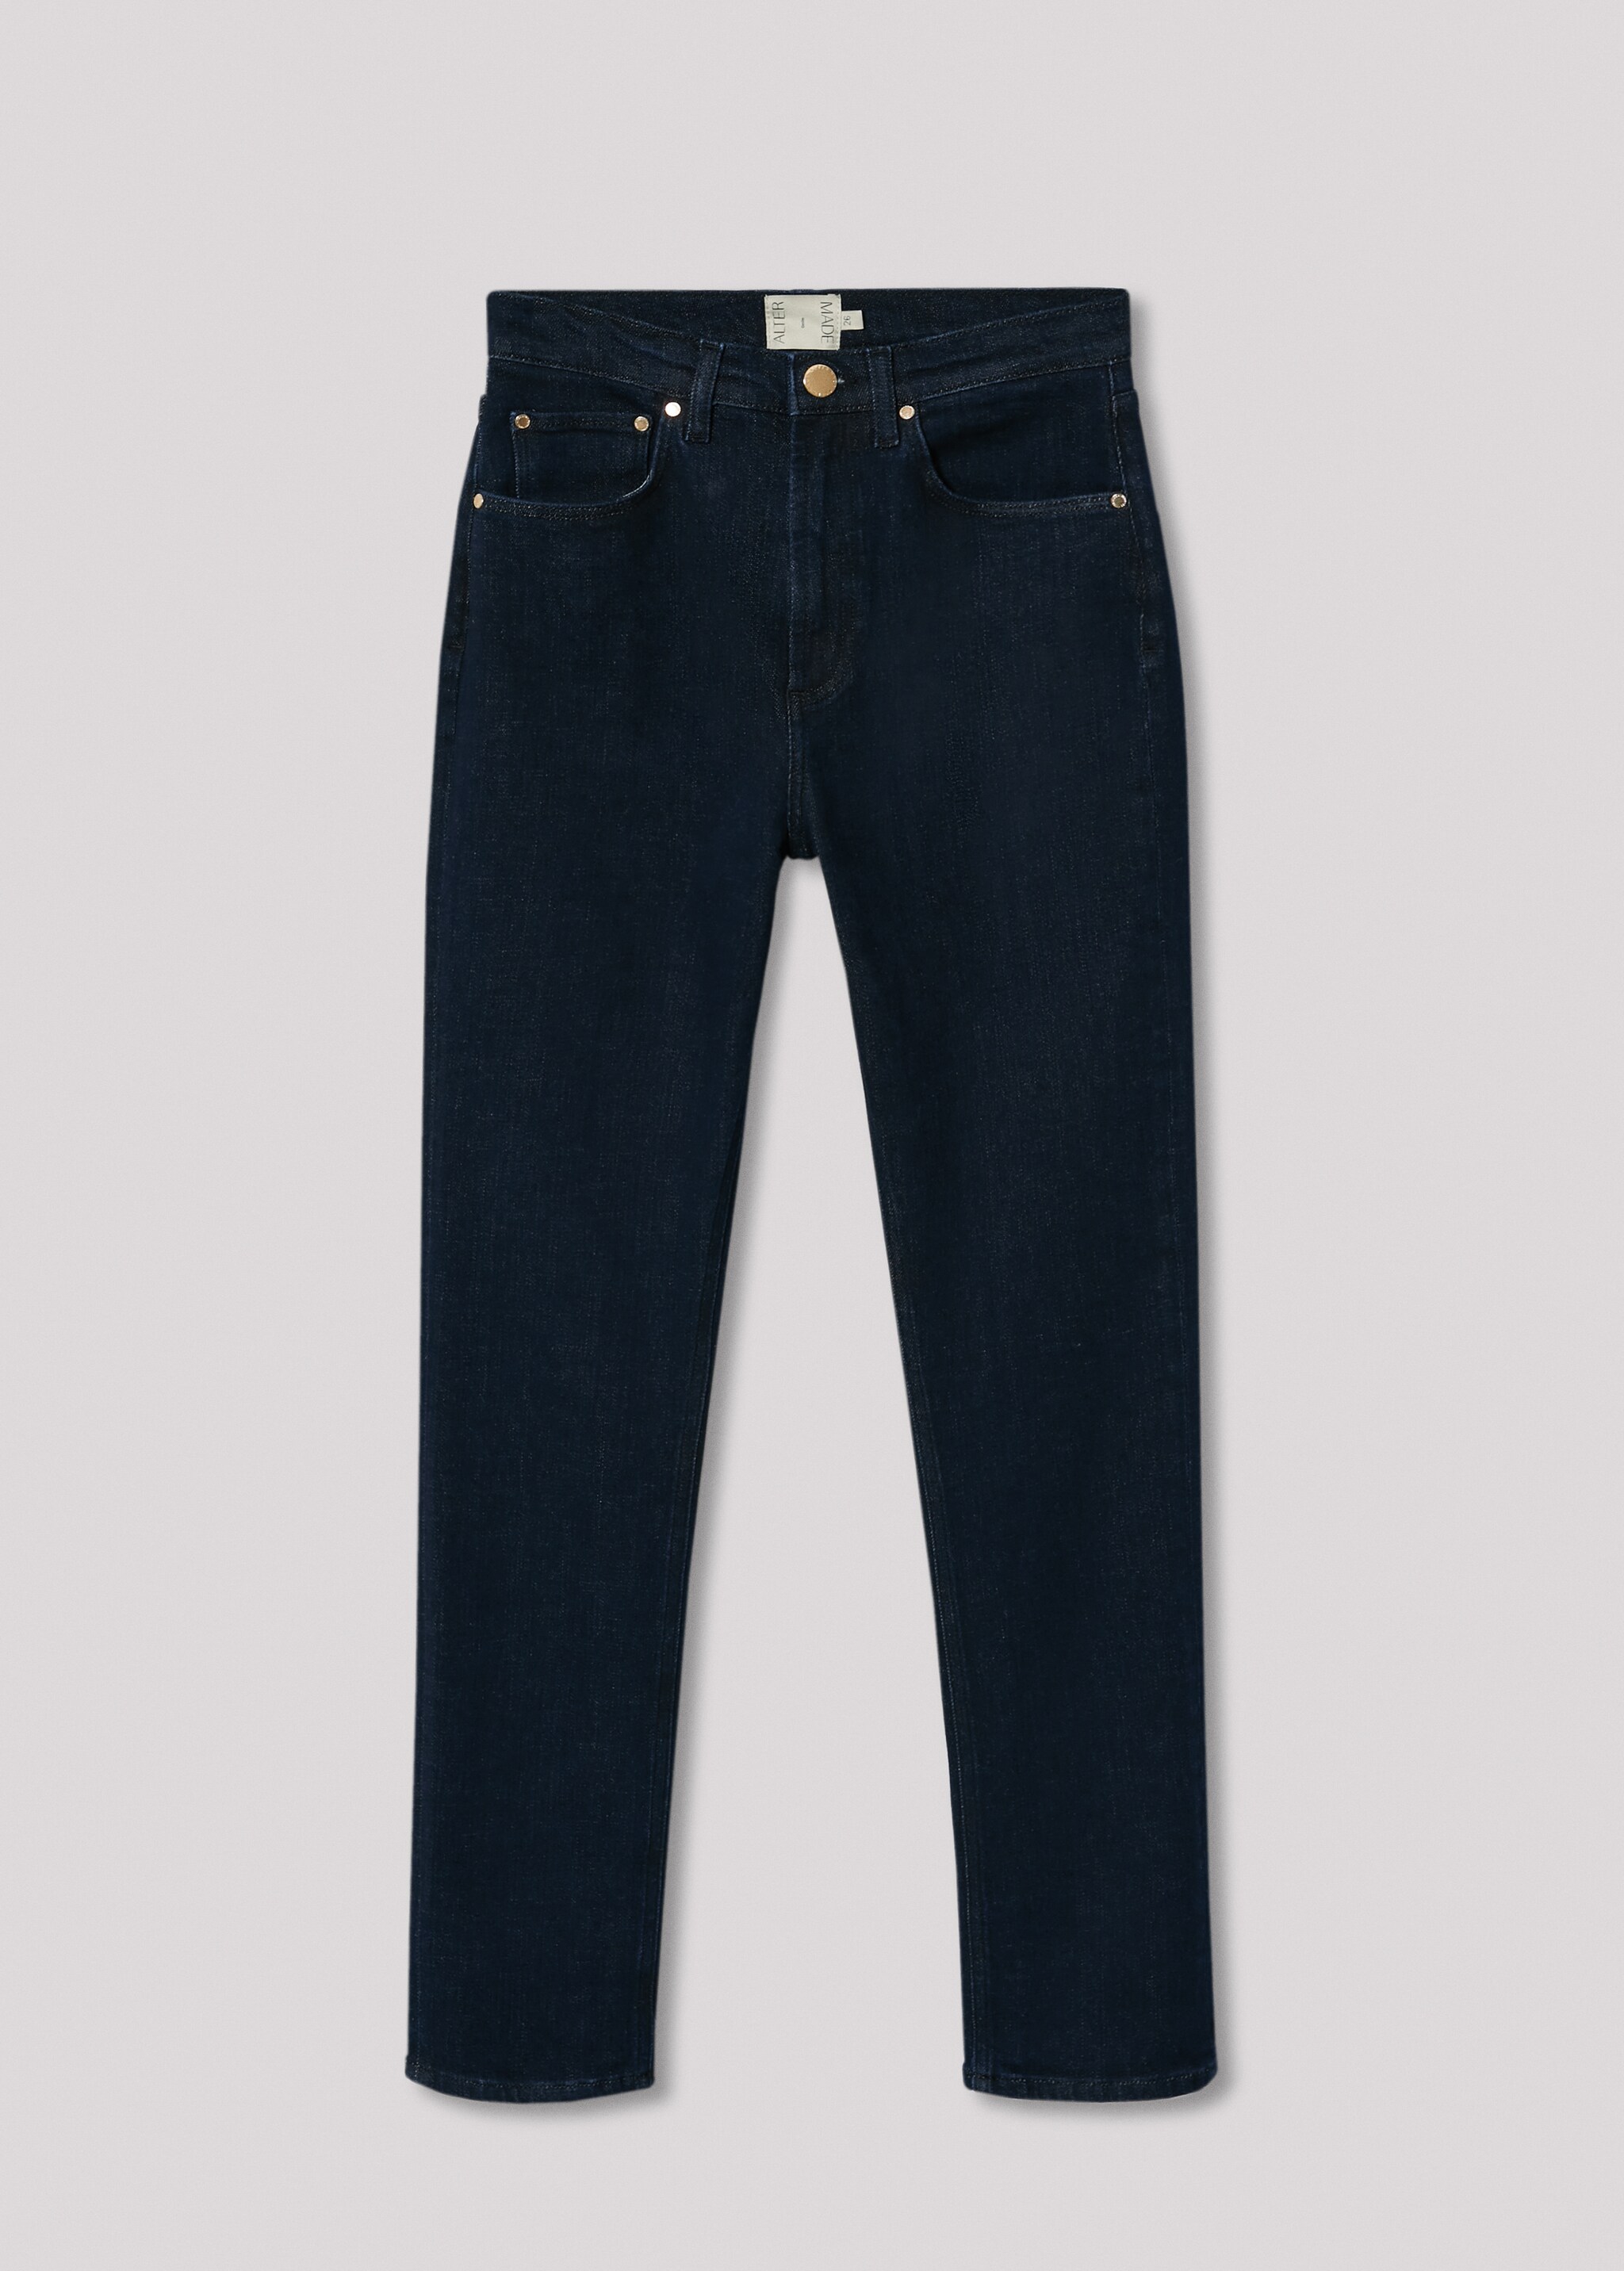 High waist straight jeans - Article without model